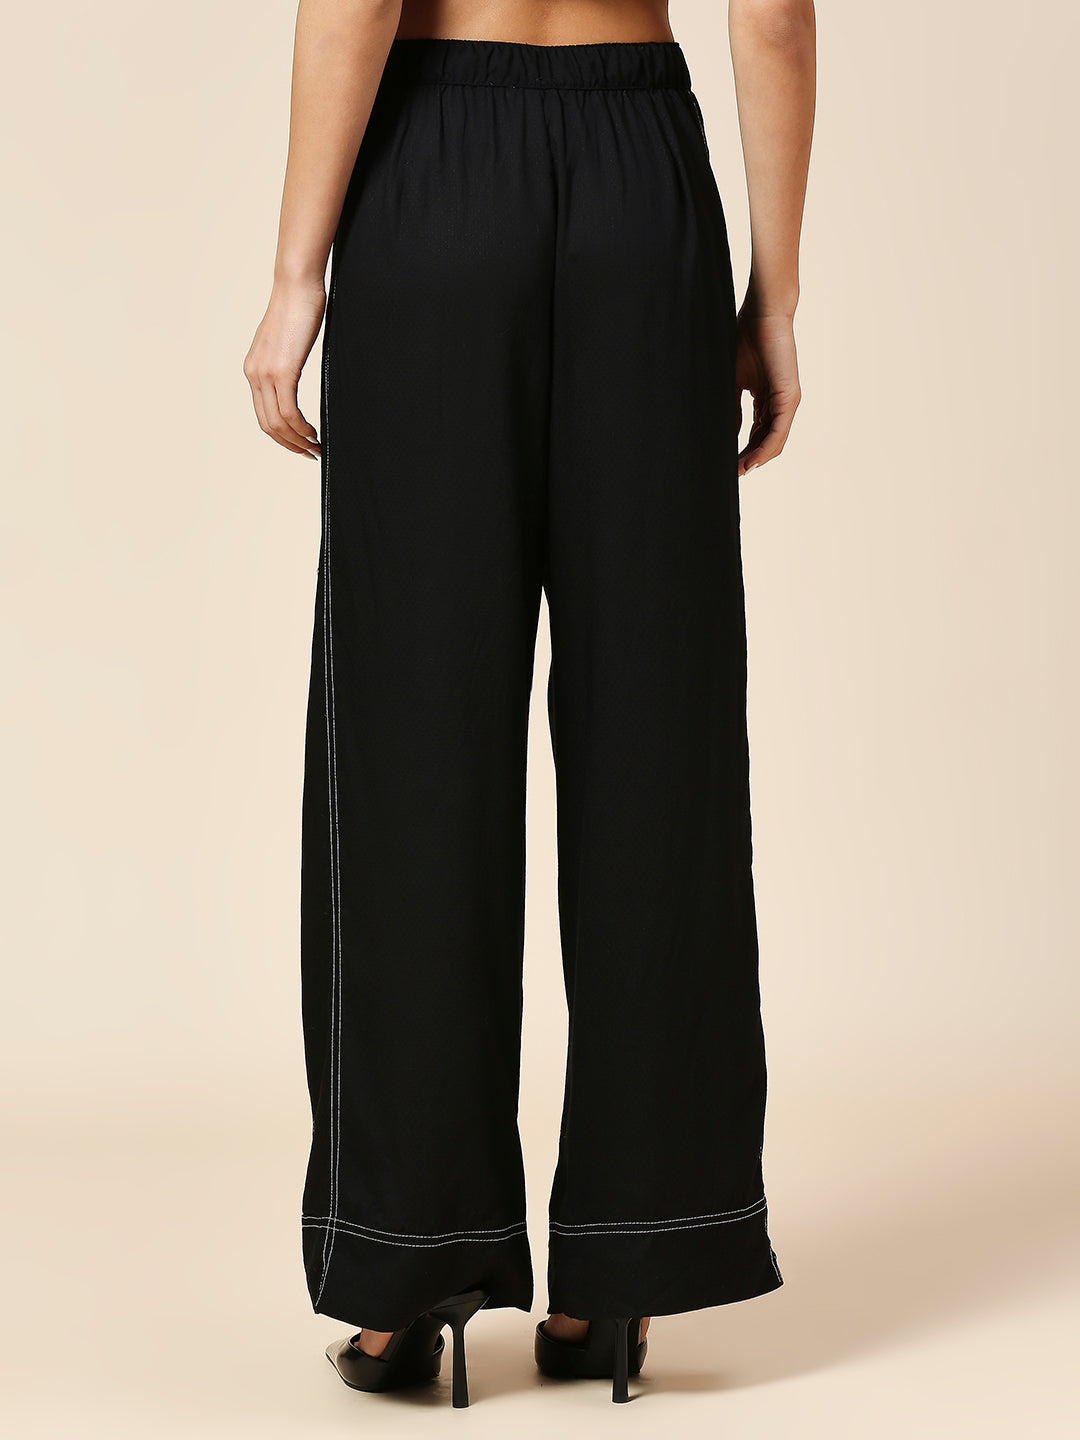 TEXTURED VISCOSE DOBBY PLEATED FLUID PANTS WITH CONTRAST STITCH DETAILING